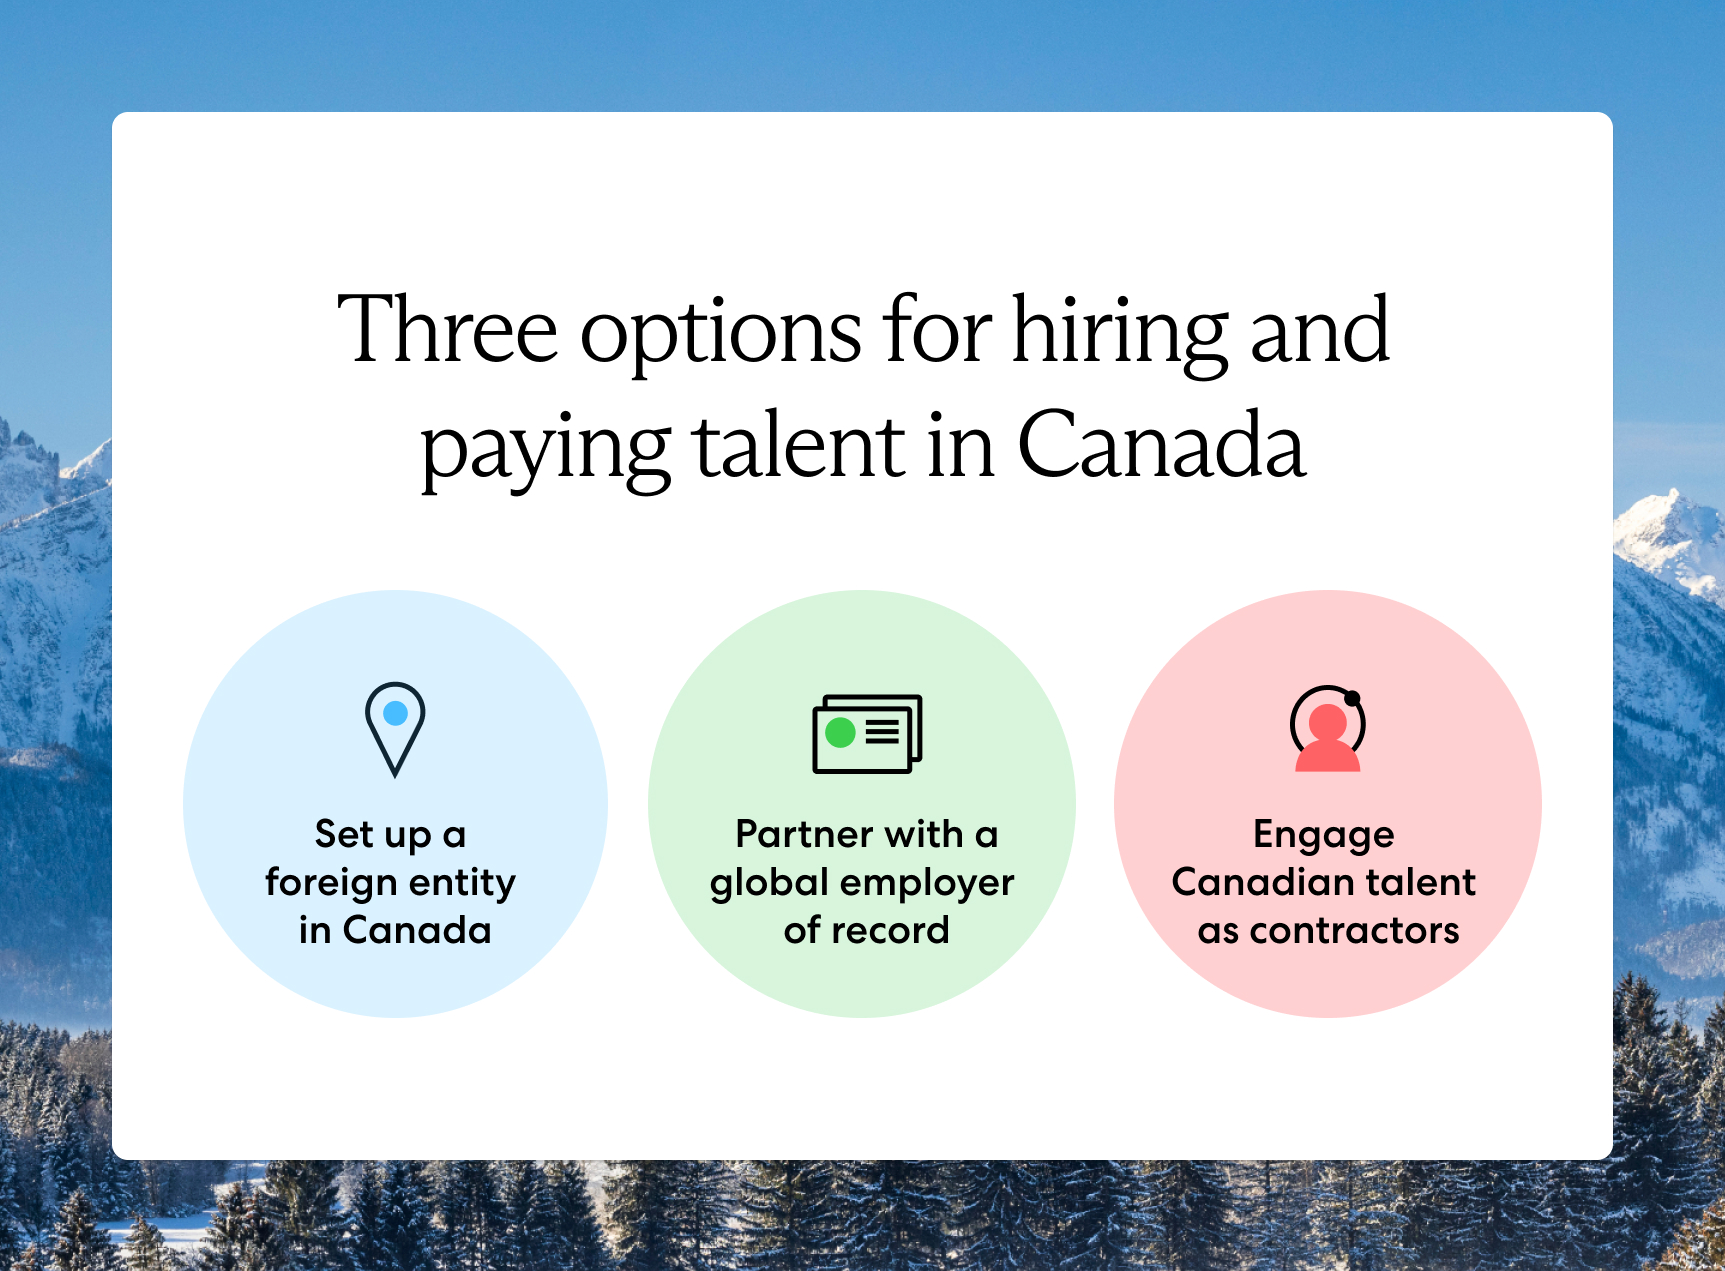 To hire an employee in Canada, global employers can set up a local entity, work with an EOR, or engage contractors